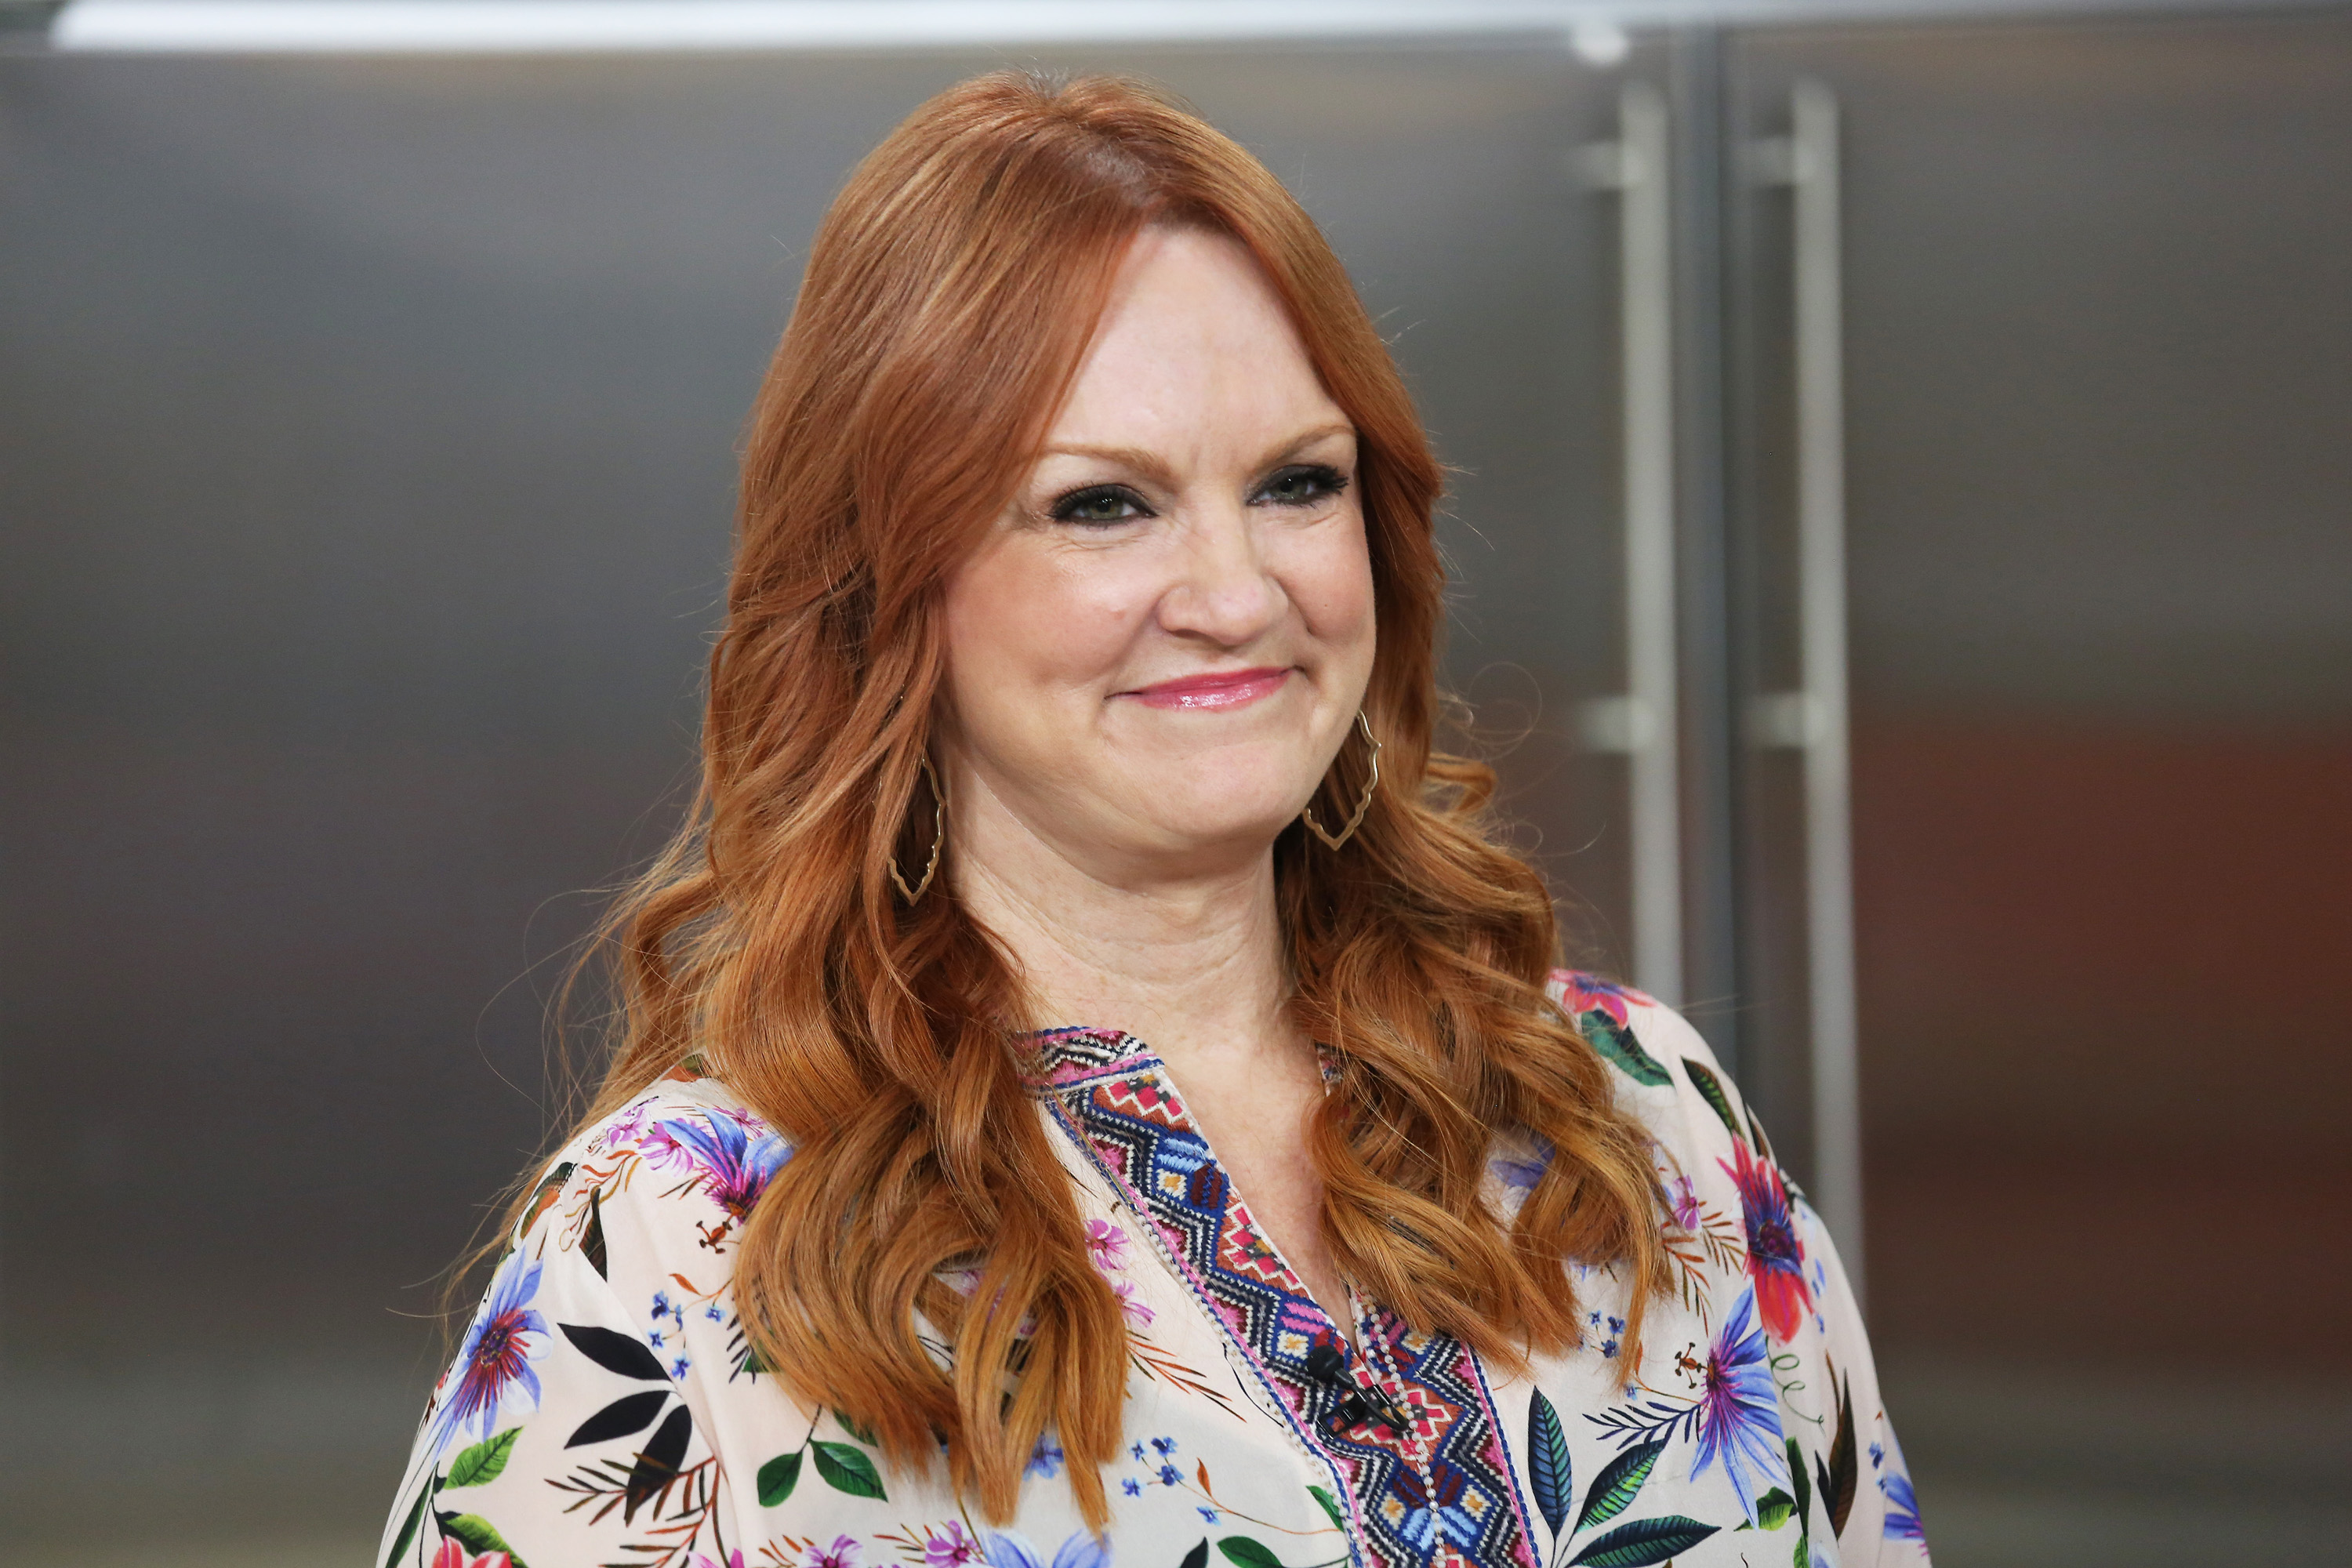 Ree Drummond wears a floral shirt on the "Today' show